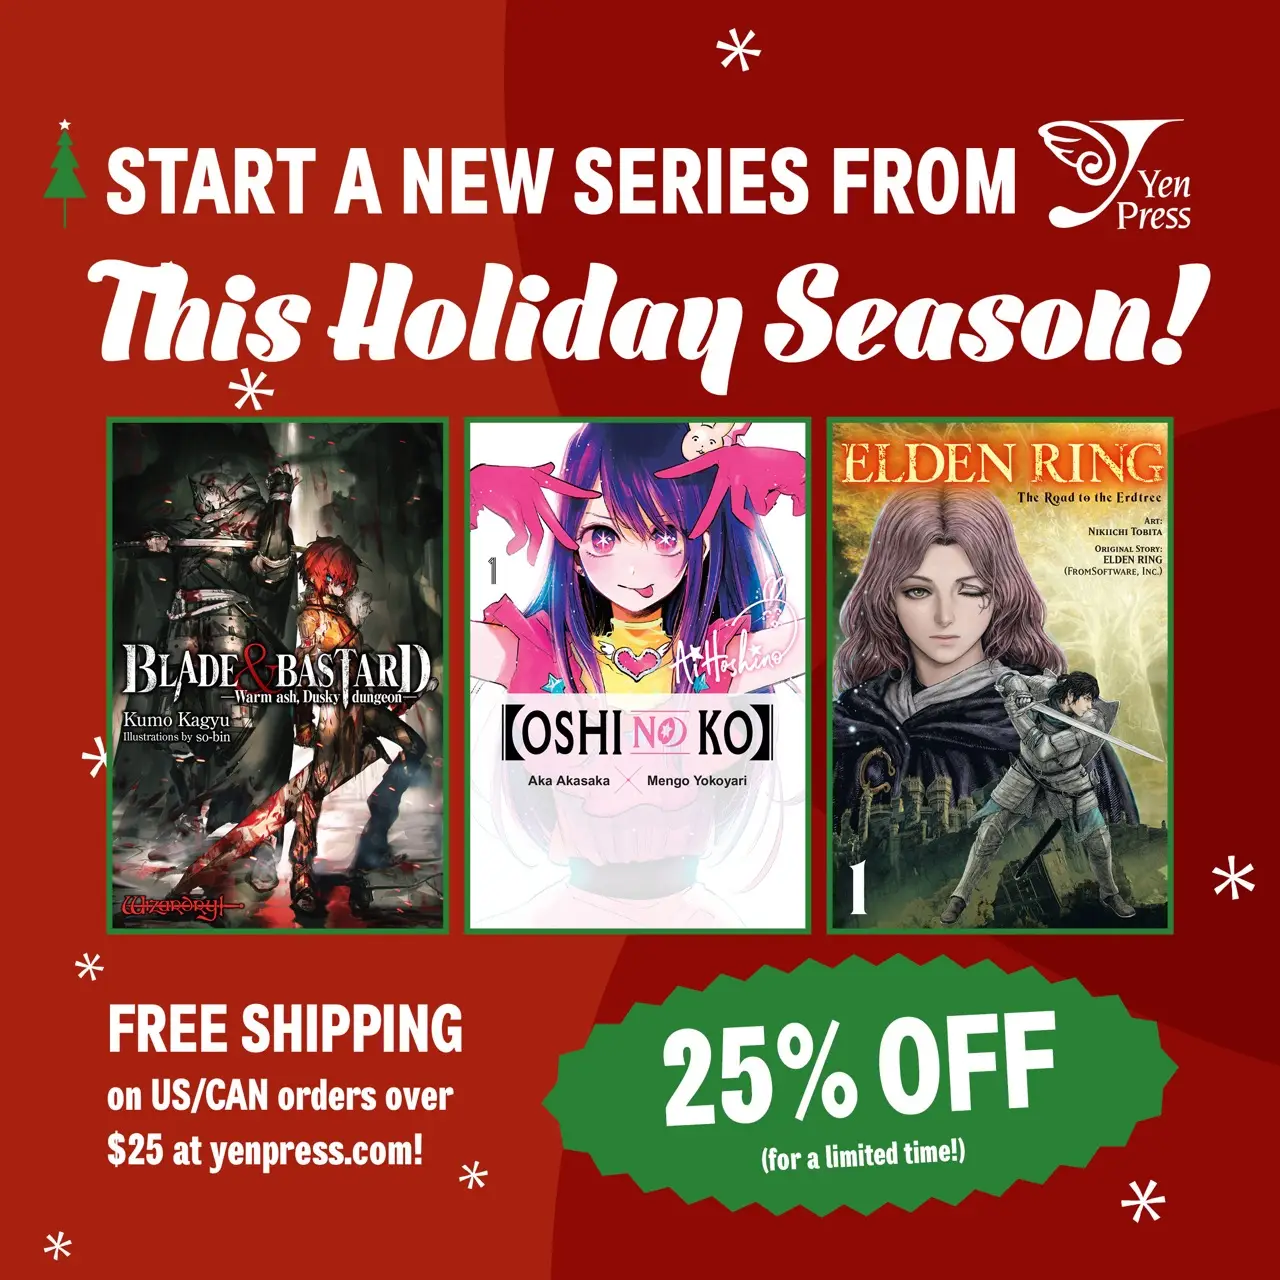 Our Expanded Webstore and Amazing Deals Await You on YenPress.com